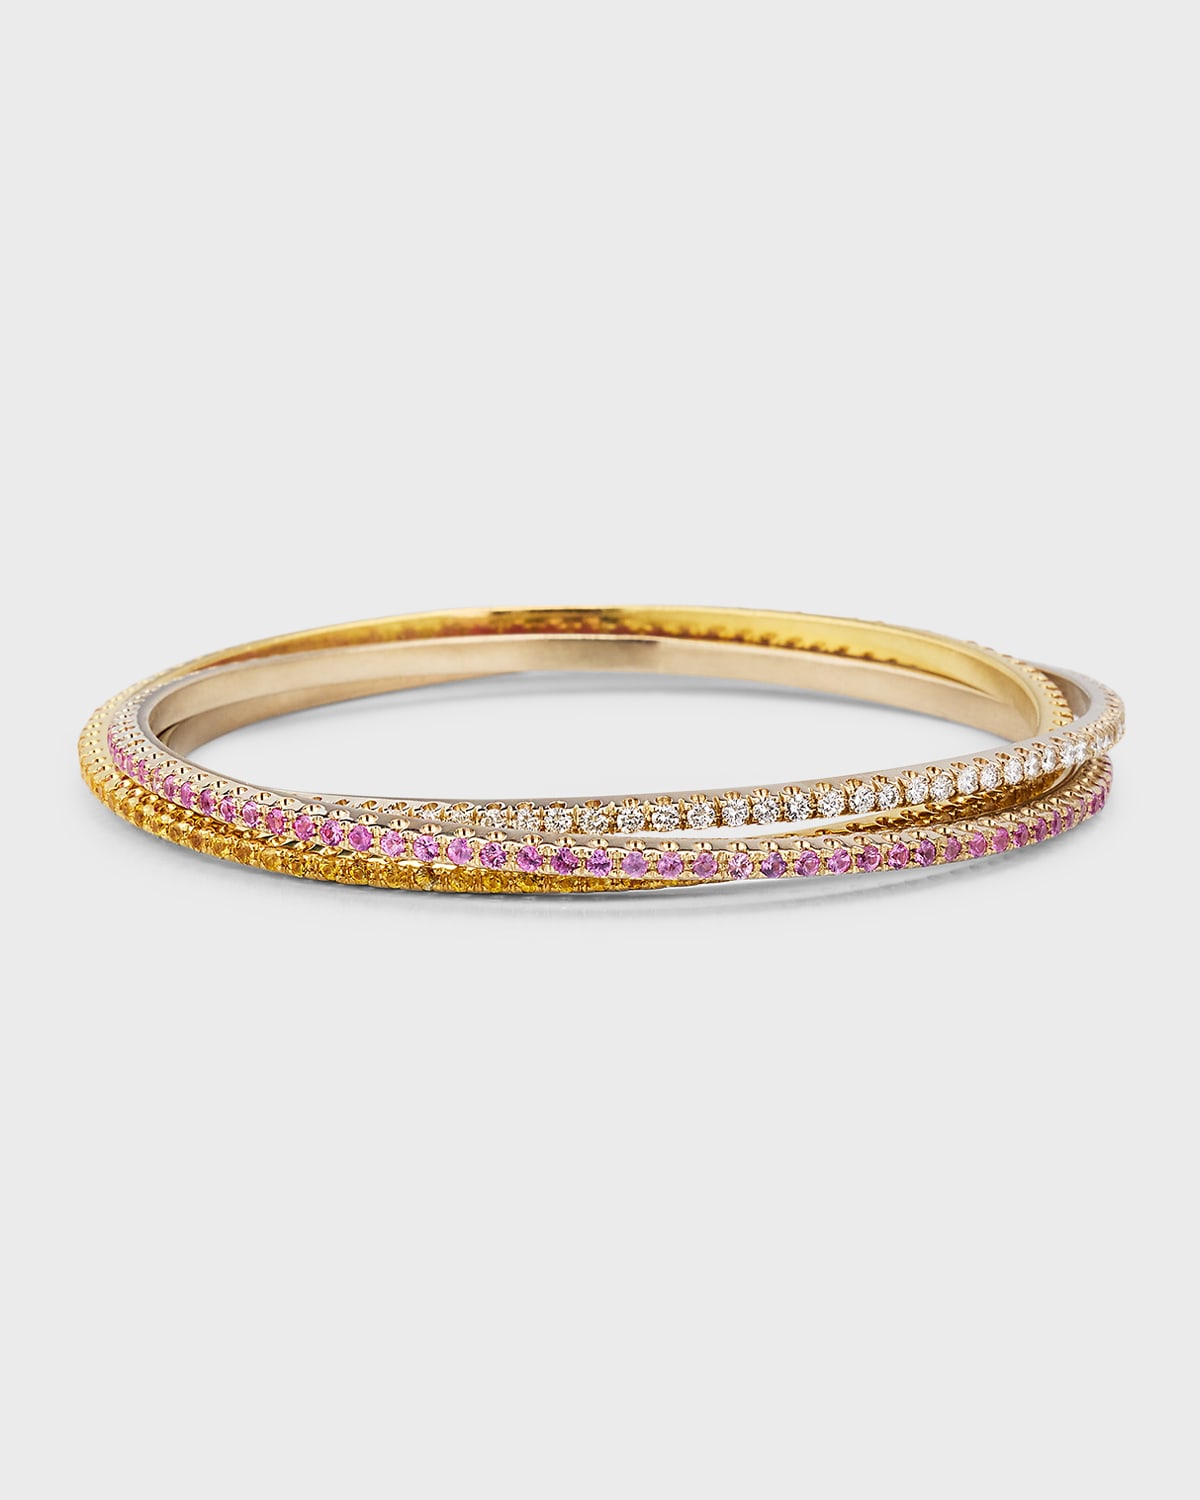 Nm Estate Estate 18k White And Yellow Gold Diamond, Yellow Sapphire And Pink Sapphire Bangles, Set Of 3